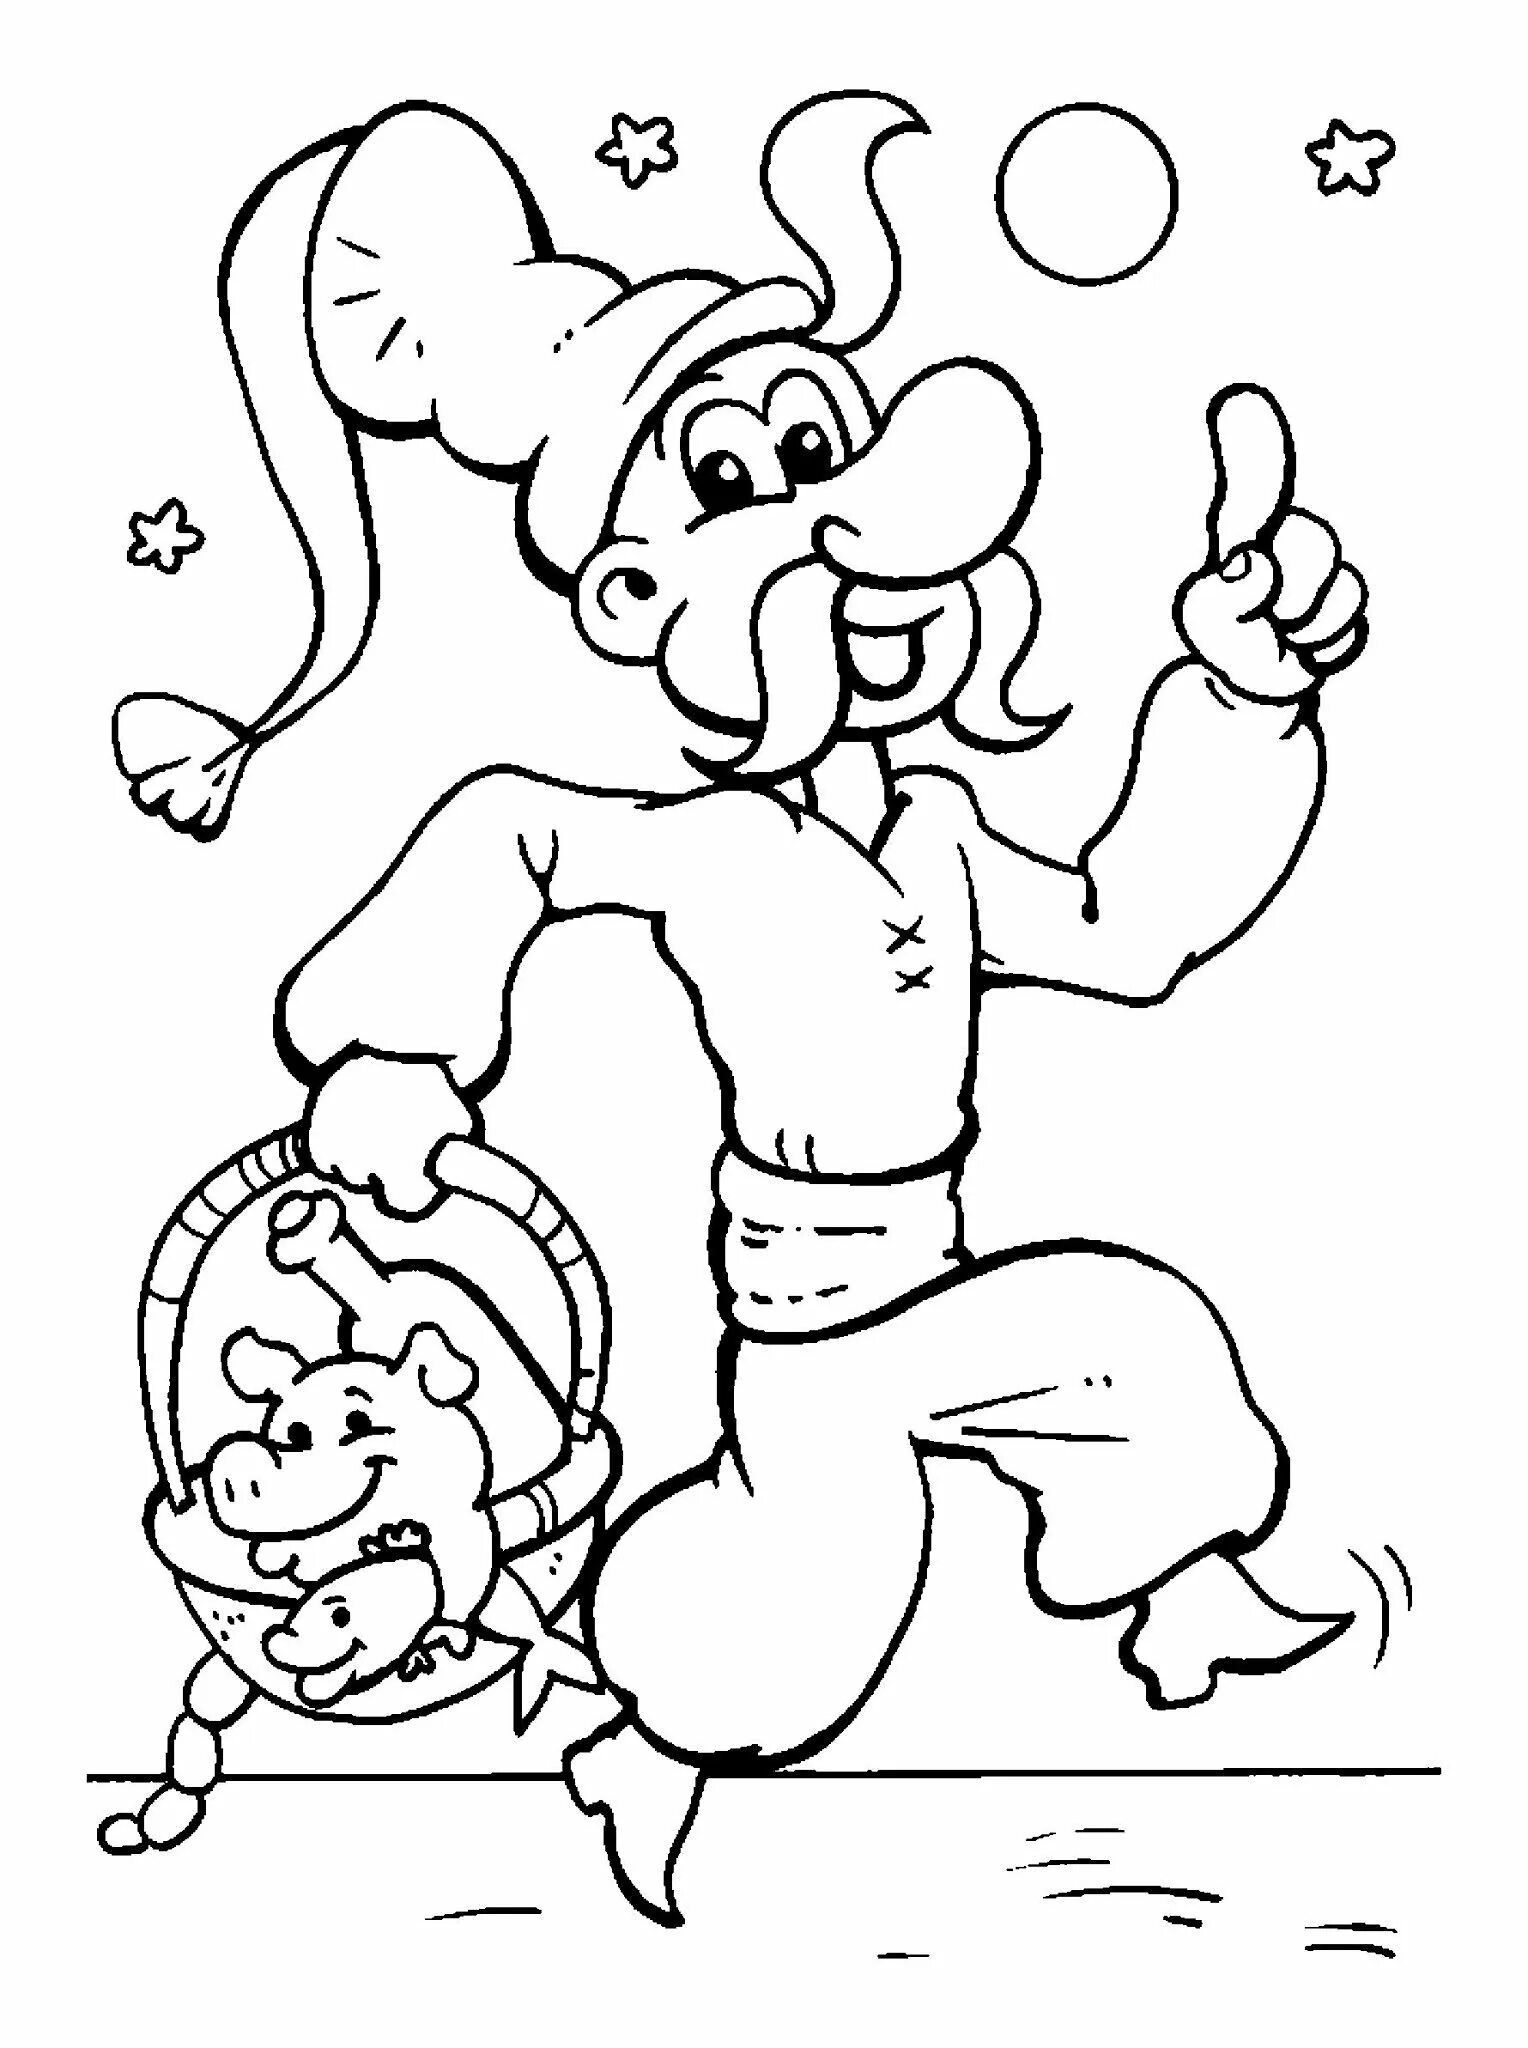 Coloring page charming cossacks for students